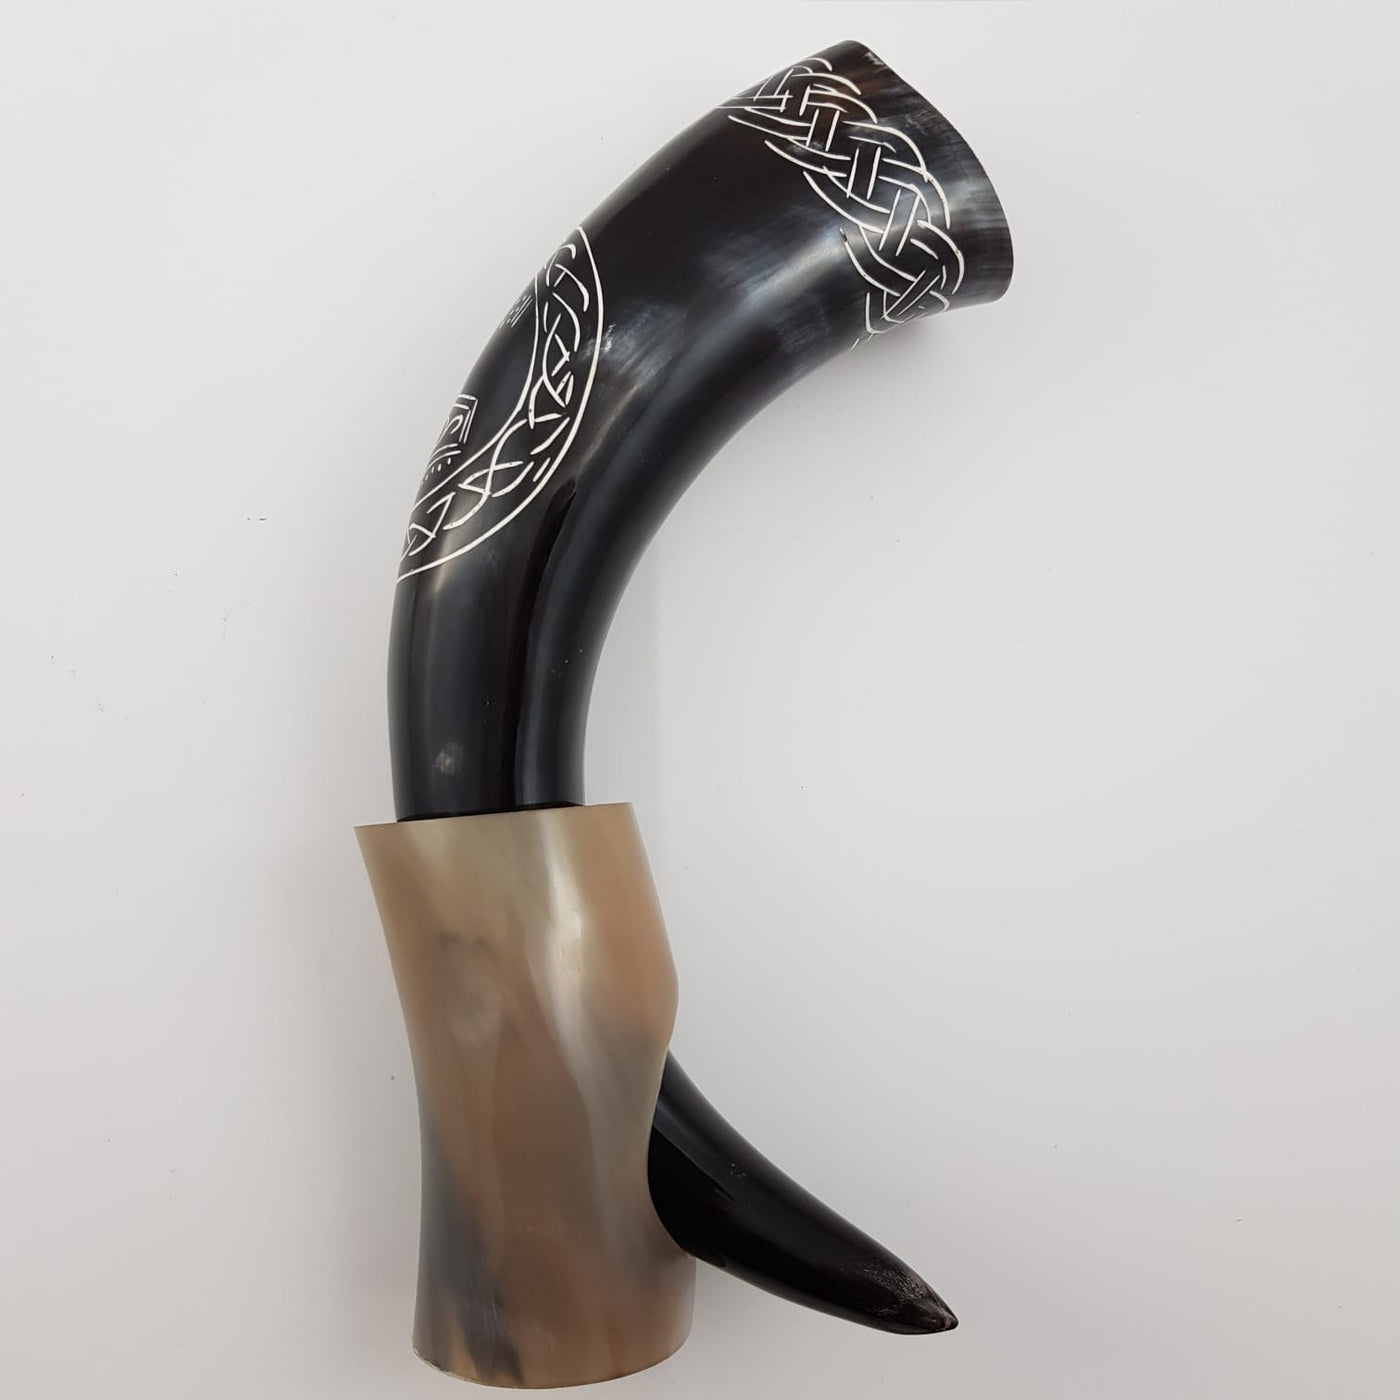 Thors Hammer Viking Buffalo Drinking Horn with stand